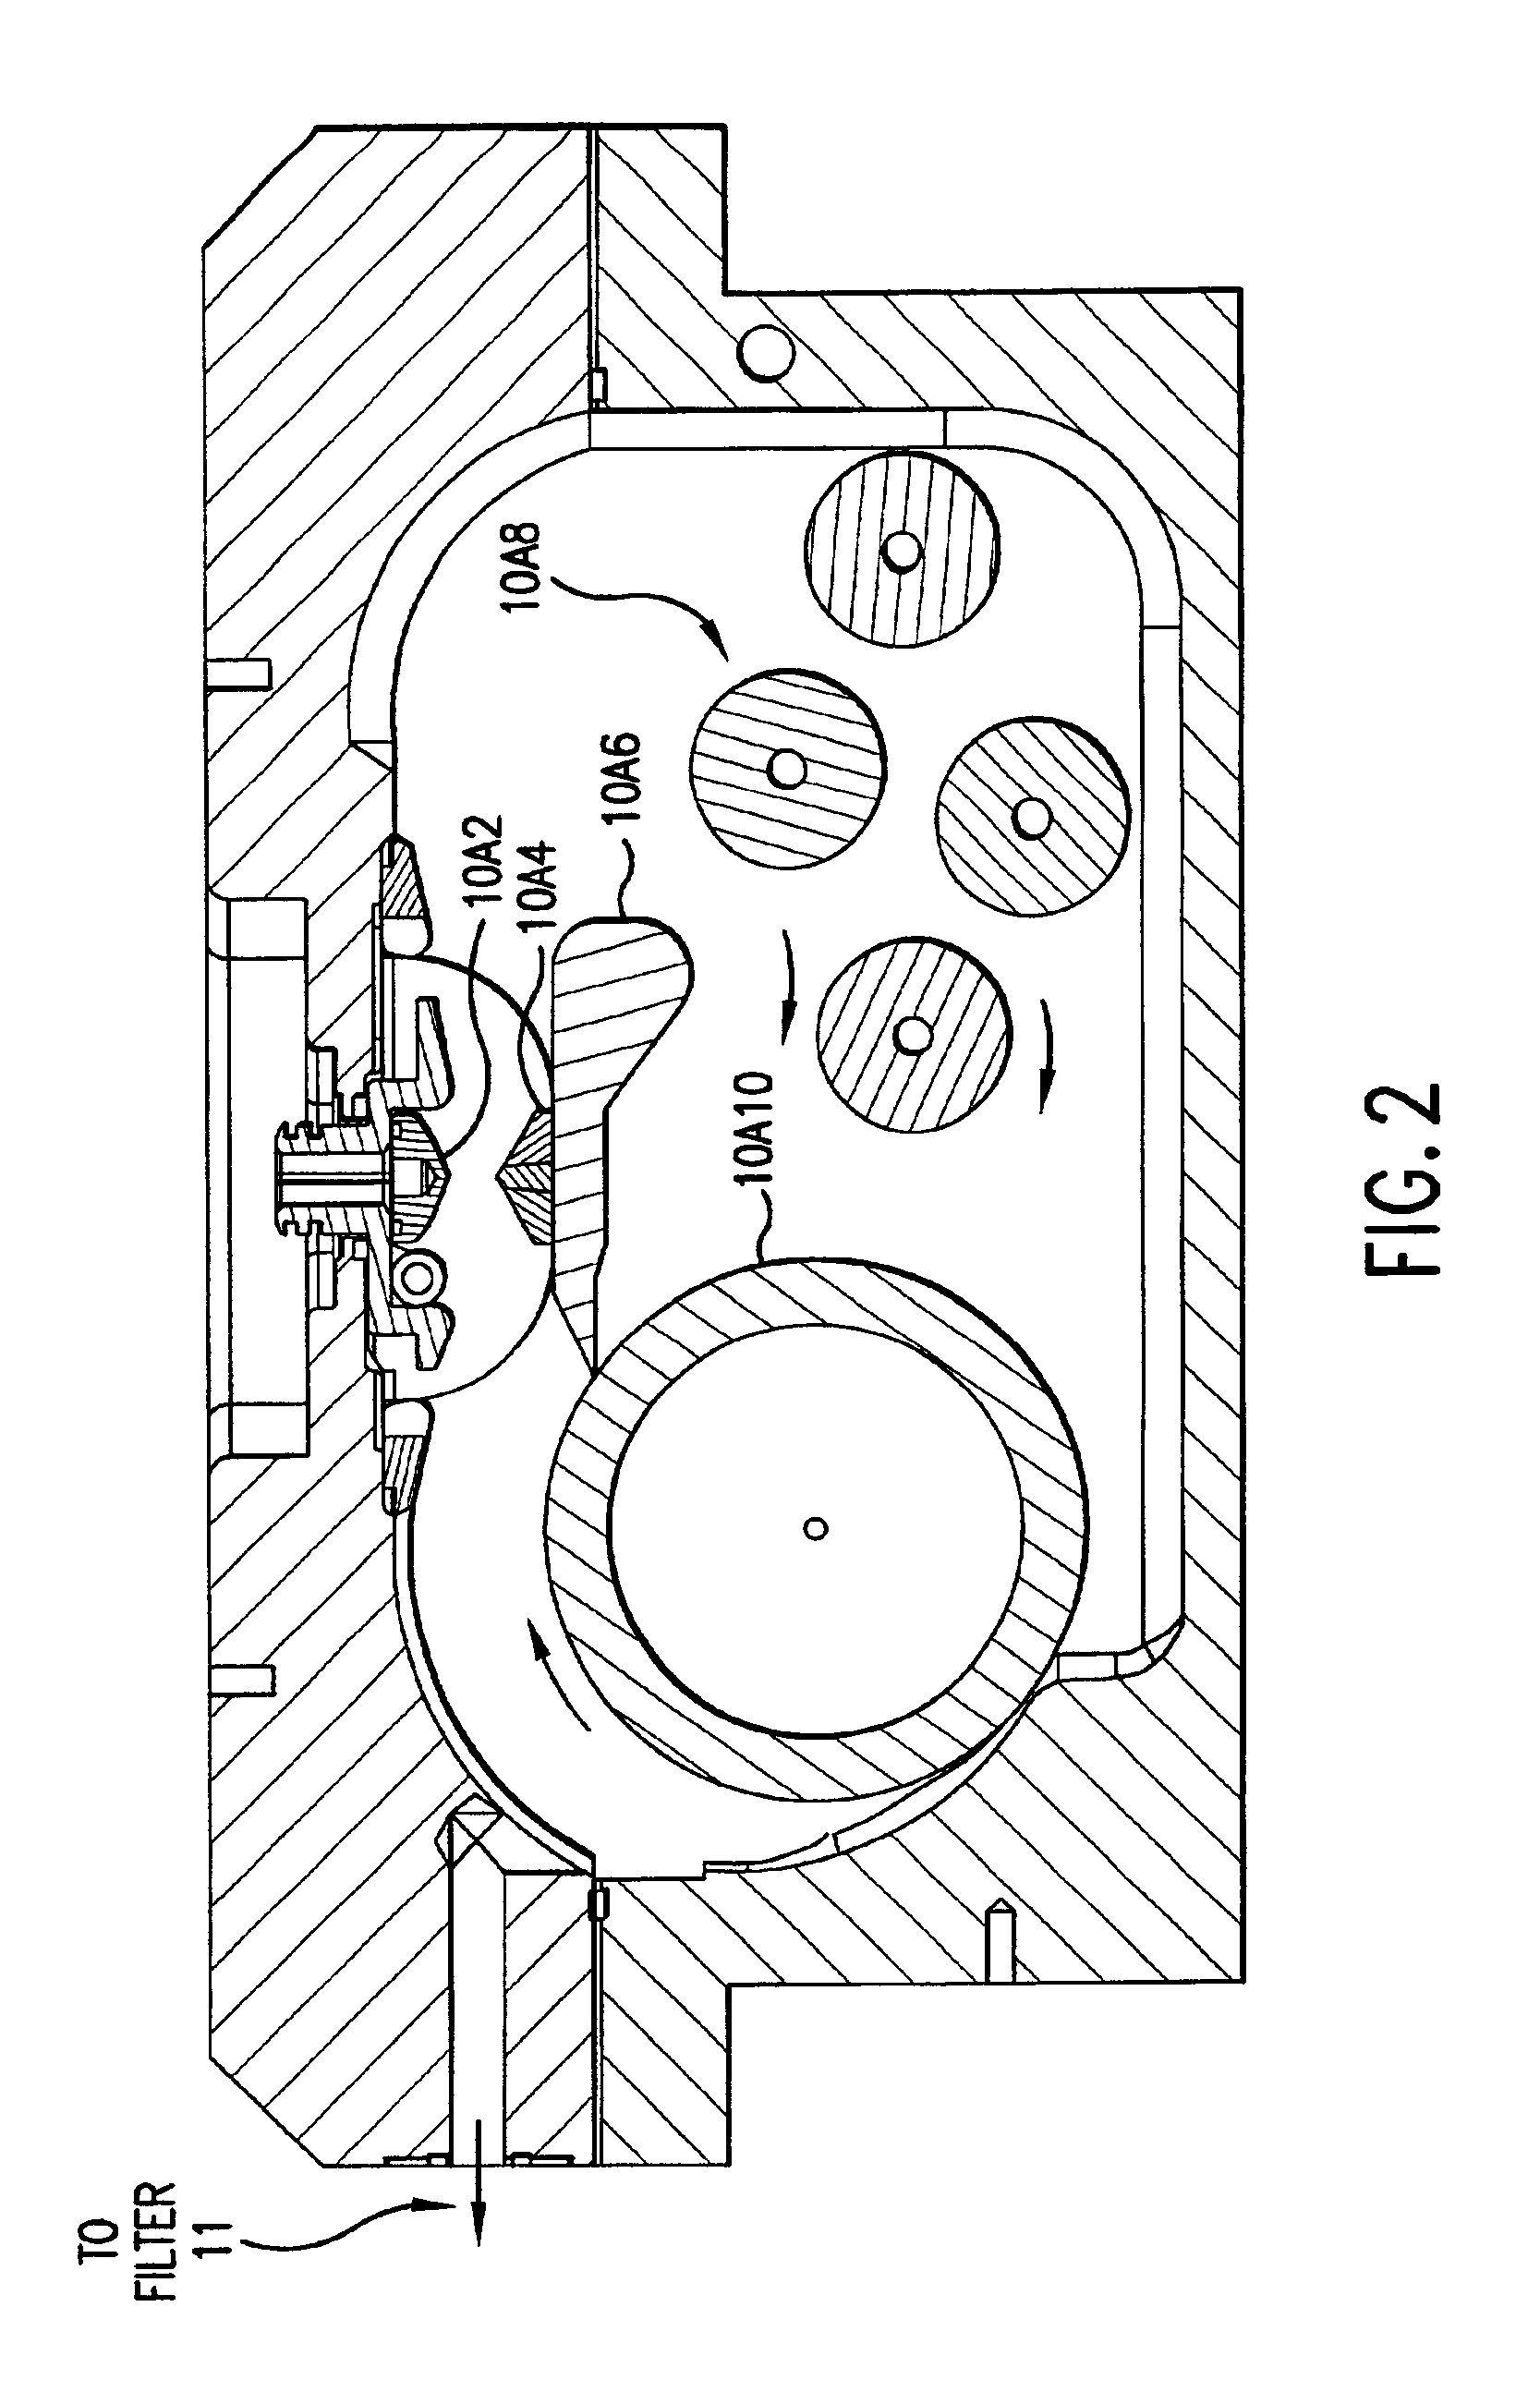 Timing control for two-chamber gas discharge laser system